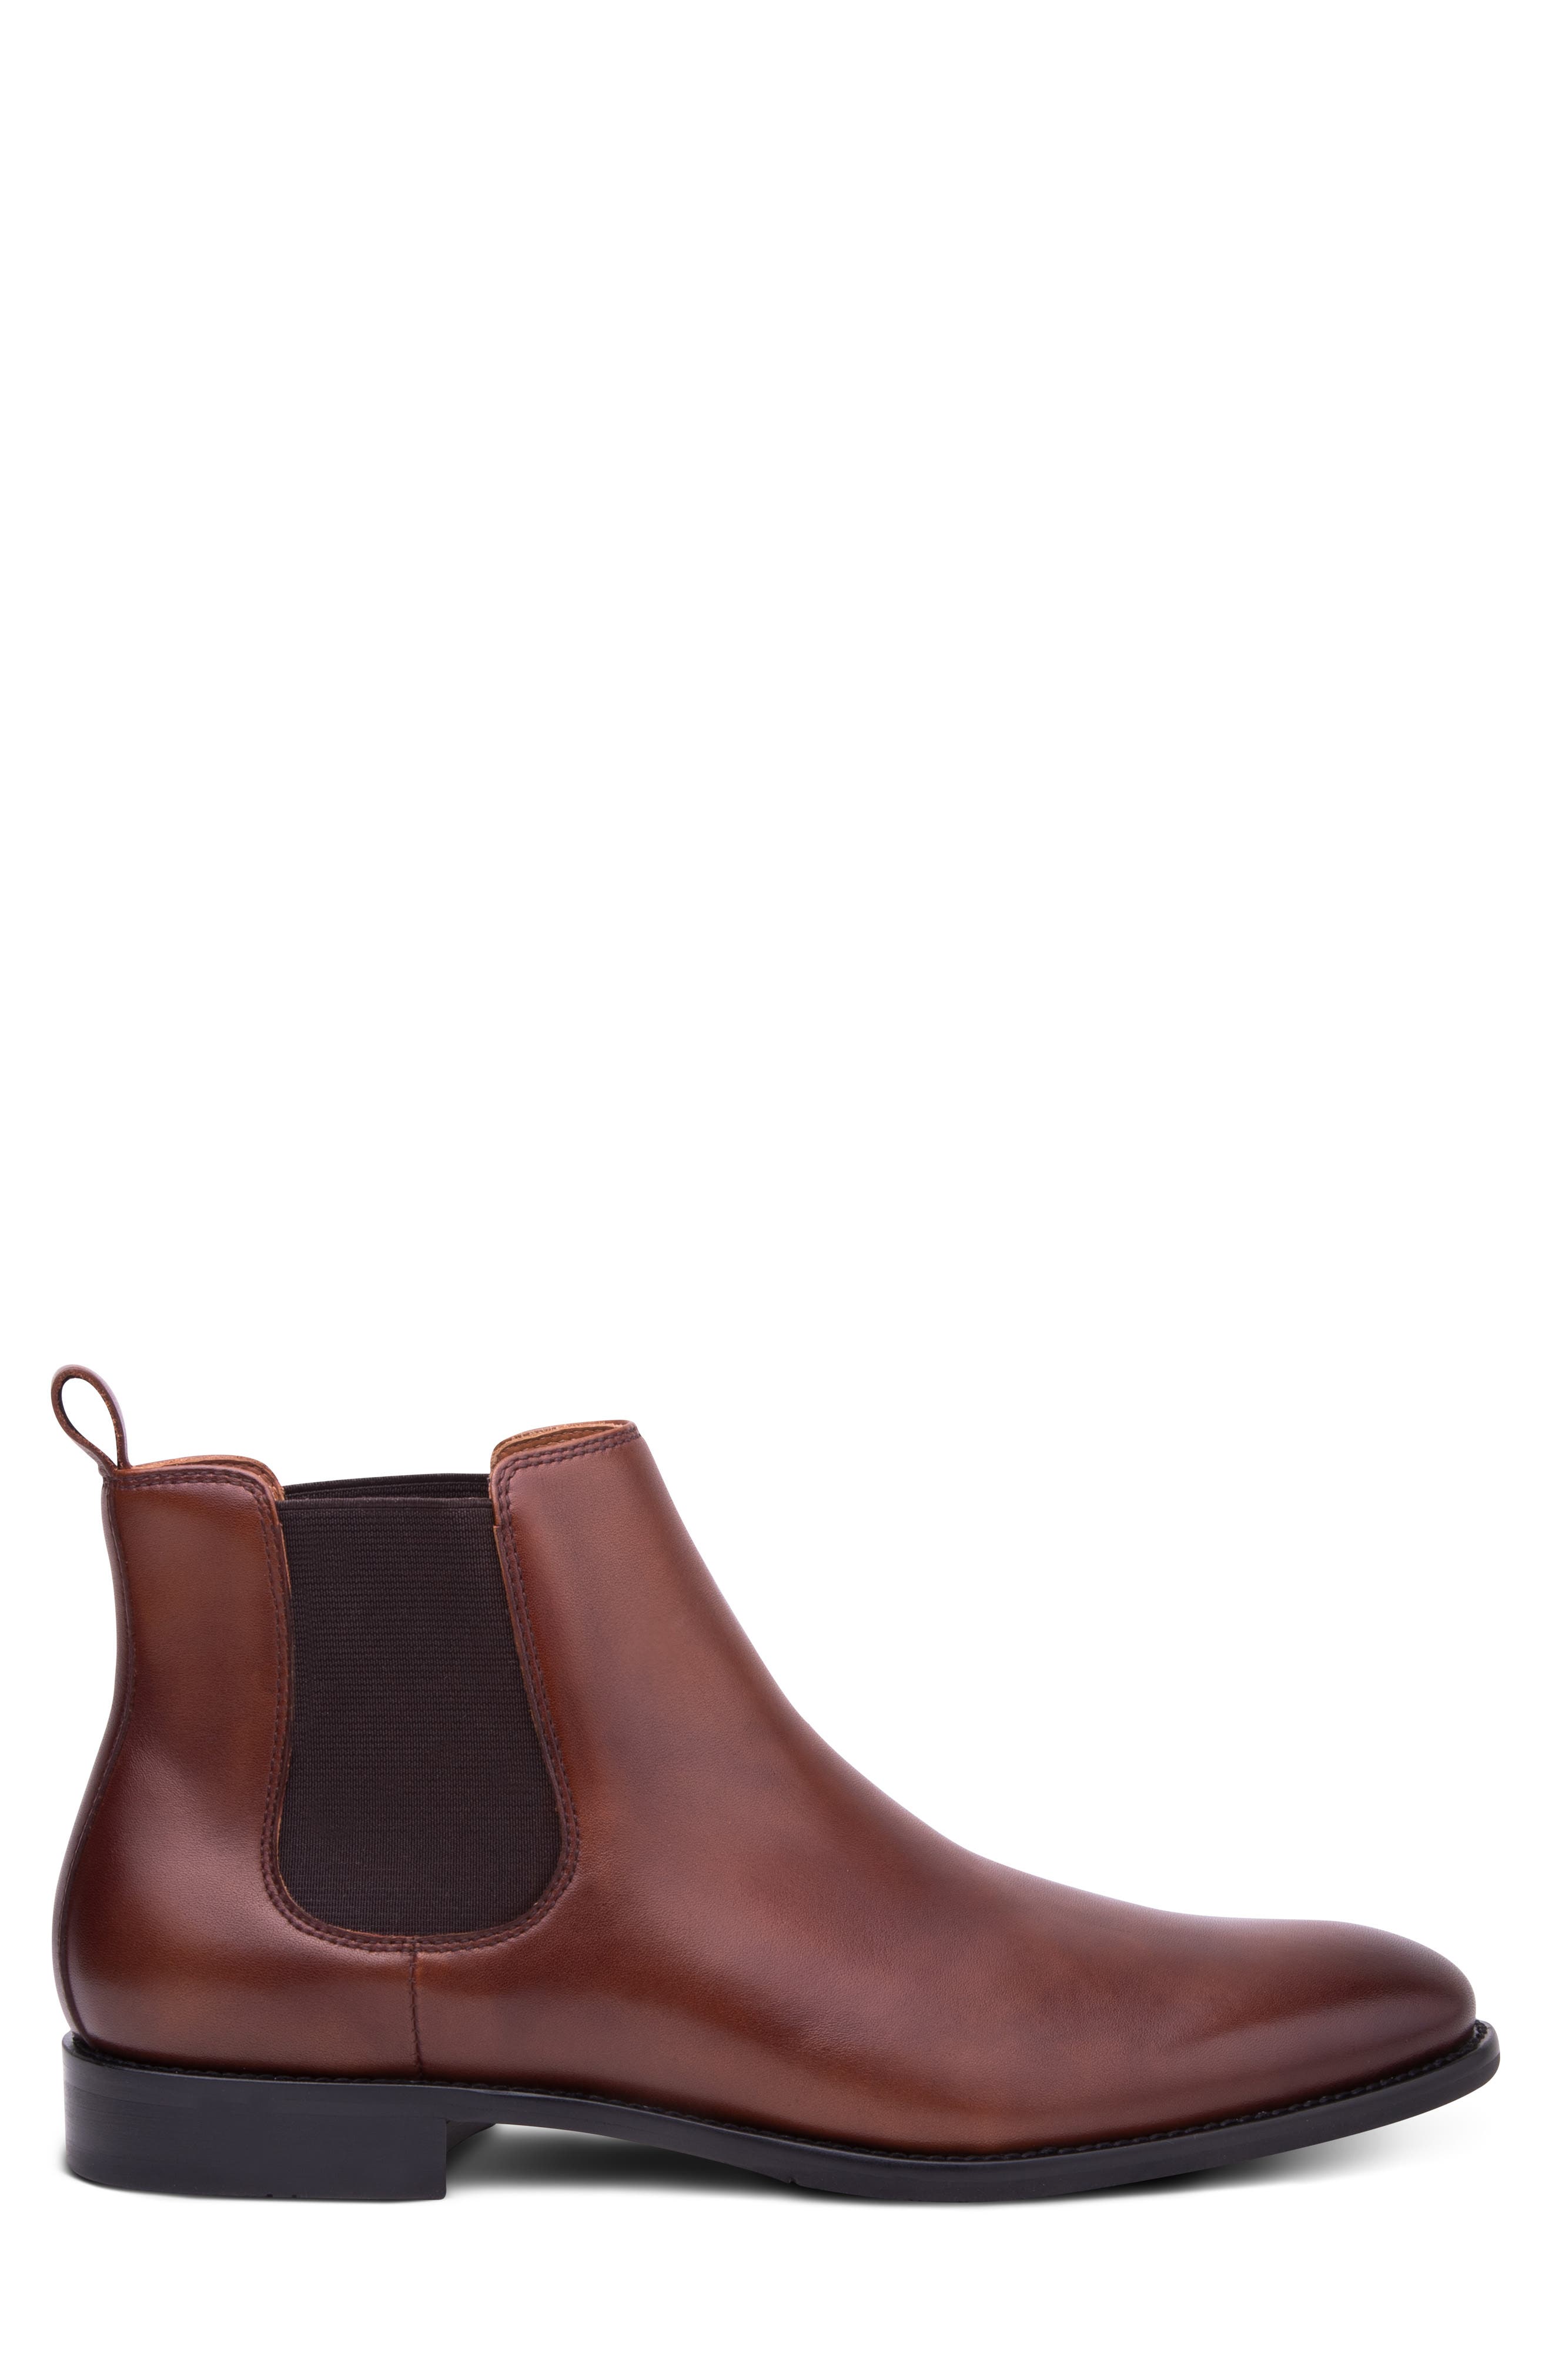 Choose Your Size Rush By Gordon Rush Leather Dexter Chelsea Boot Black 